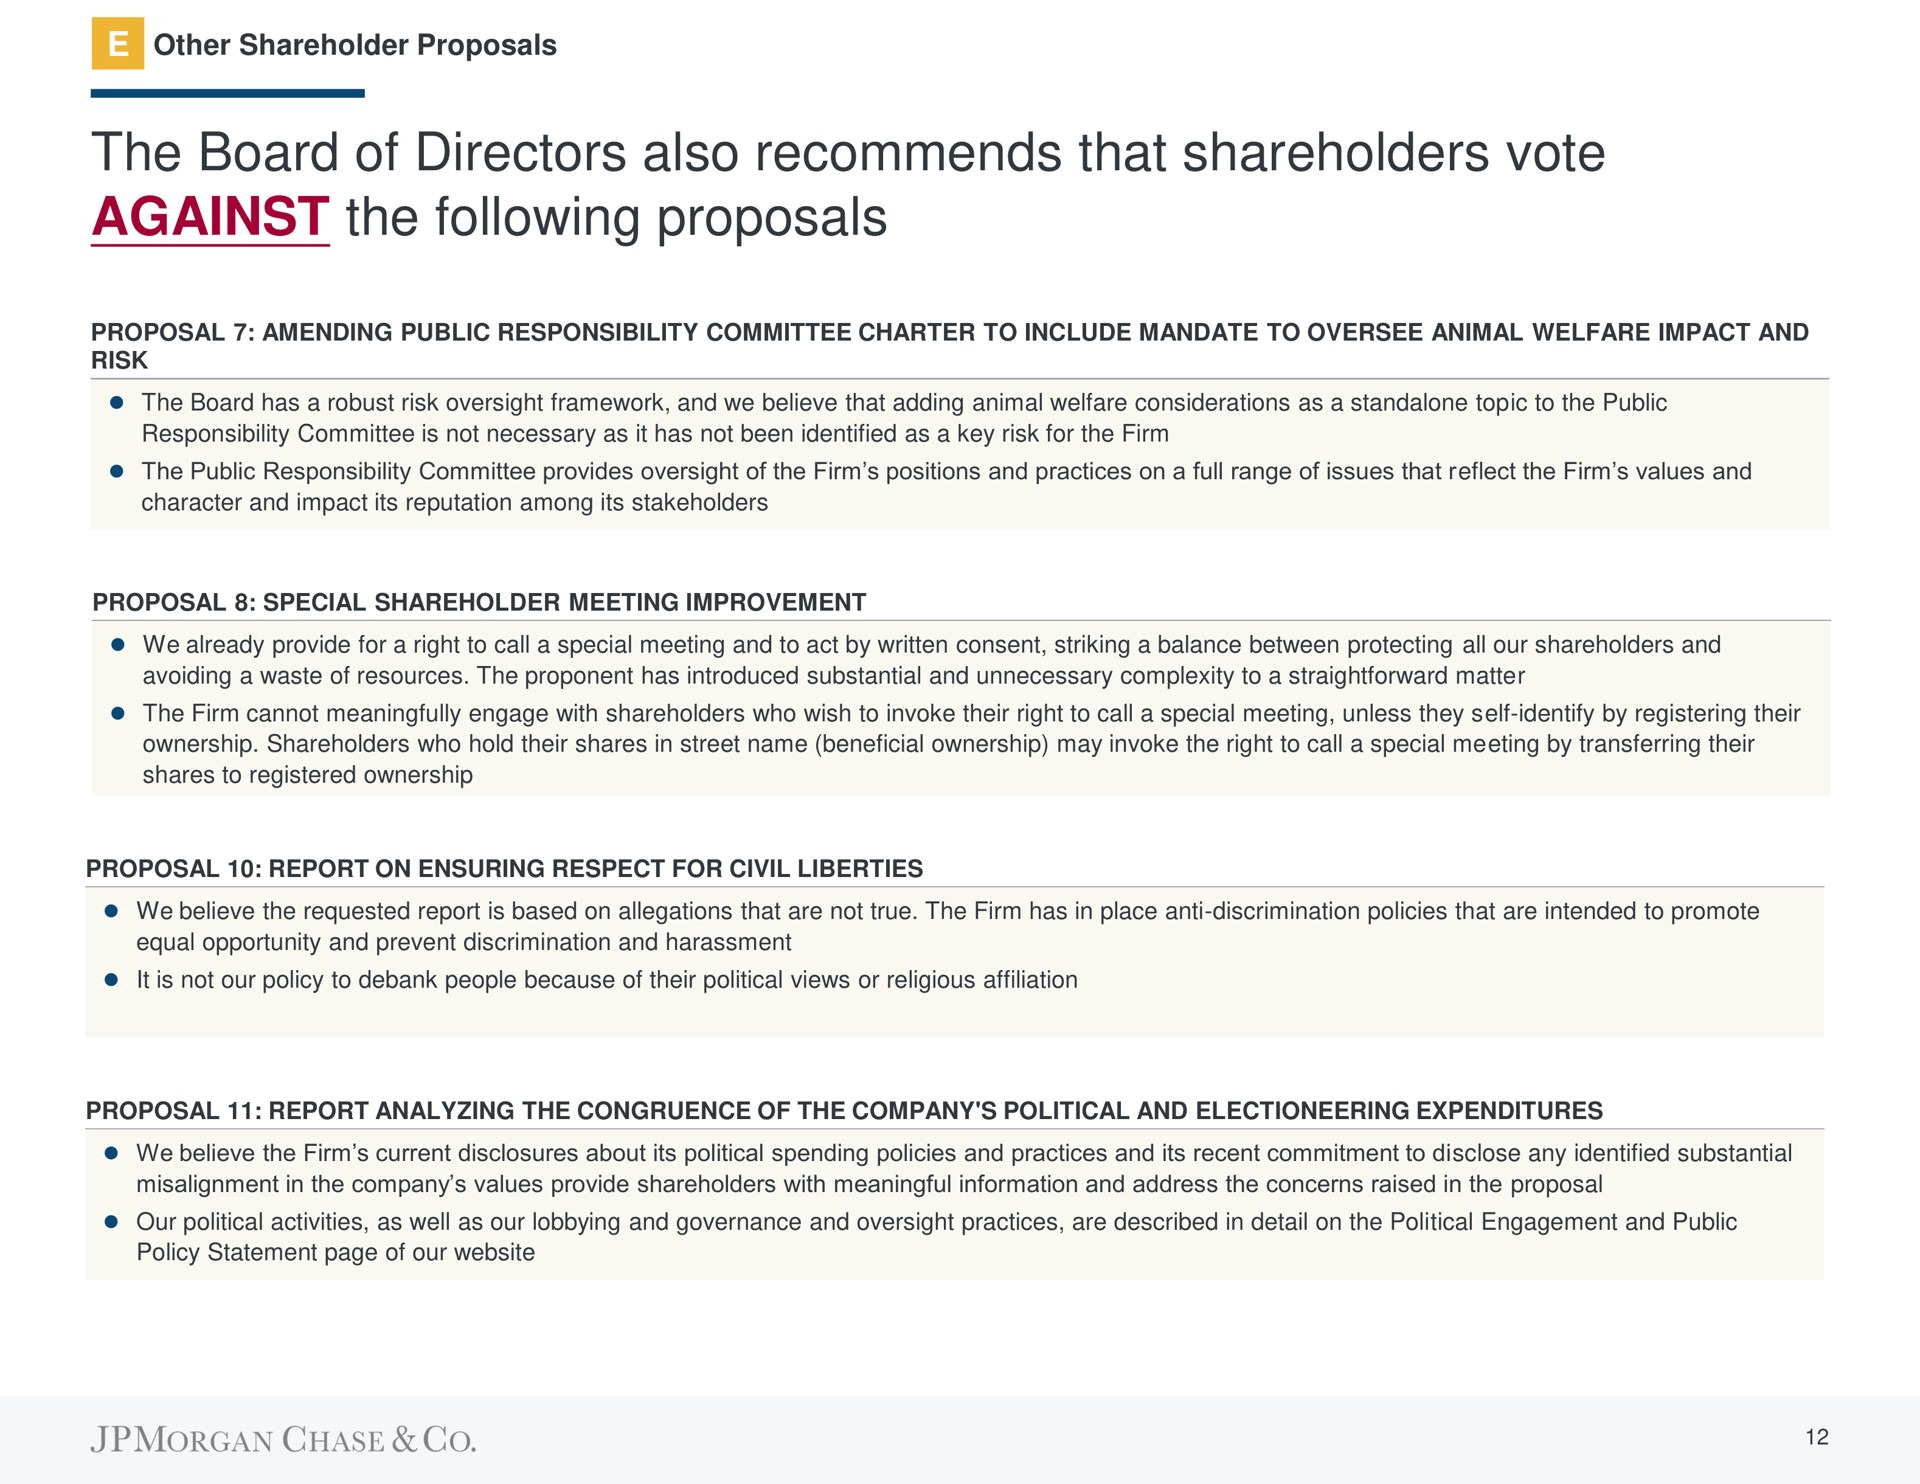 the board of directors also recommends that shareholders vote against the following proposals | J.P.Morgan